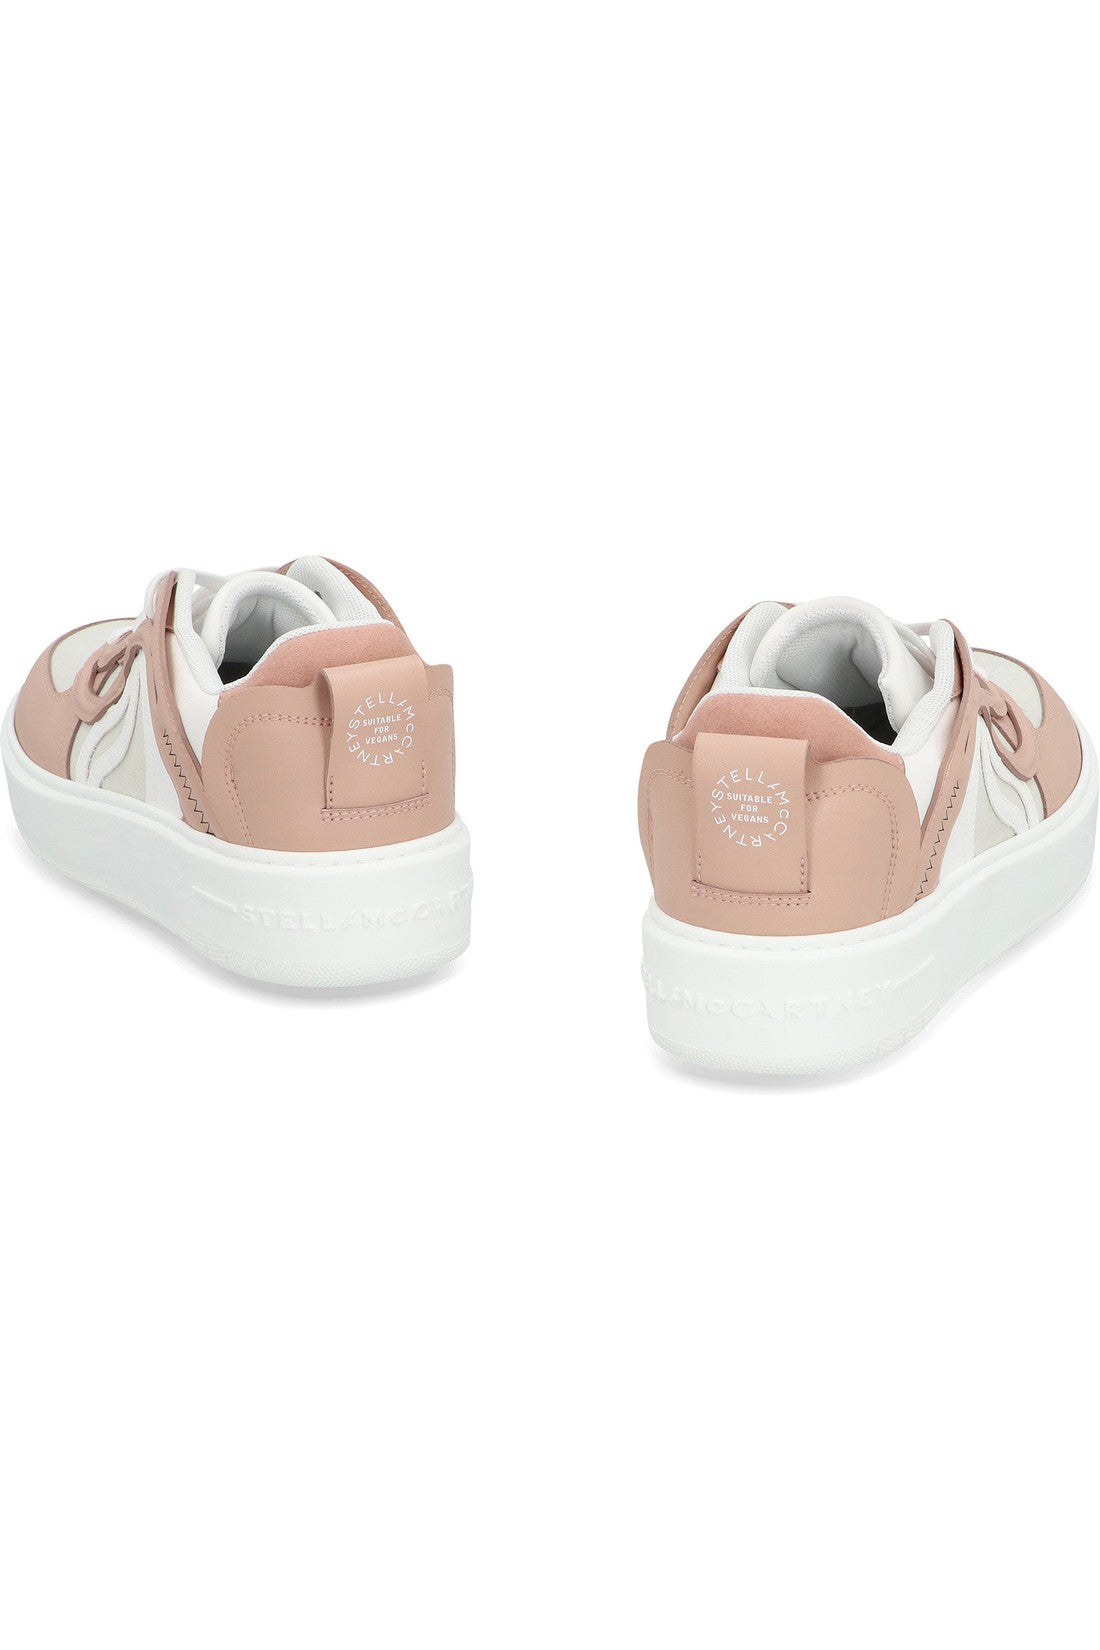 Stella McCartney-OUTLET-SALE-S-Wave 1 low-top sneakers-ARCHIVIST